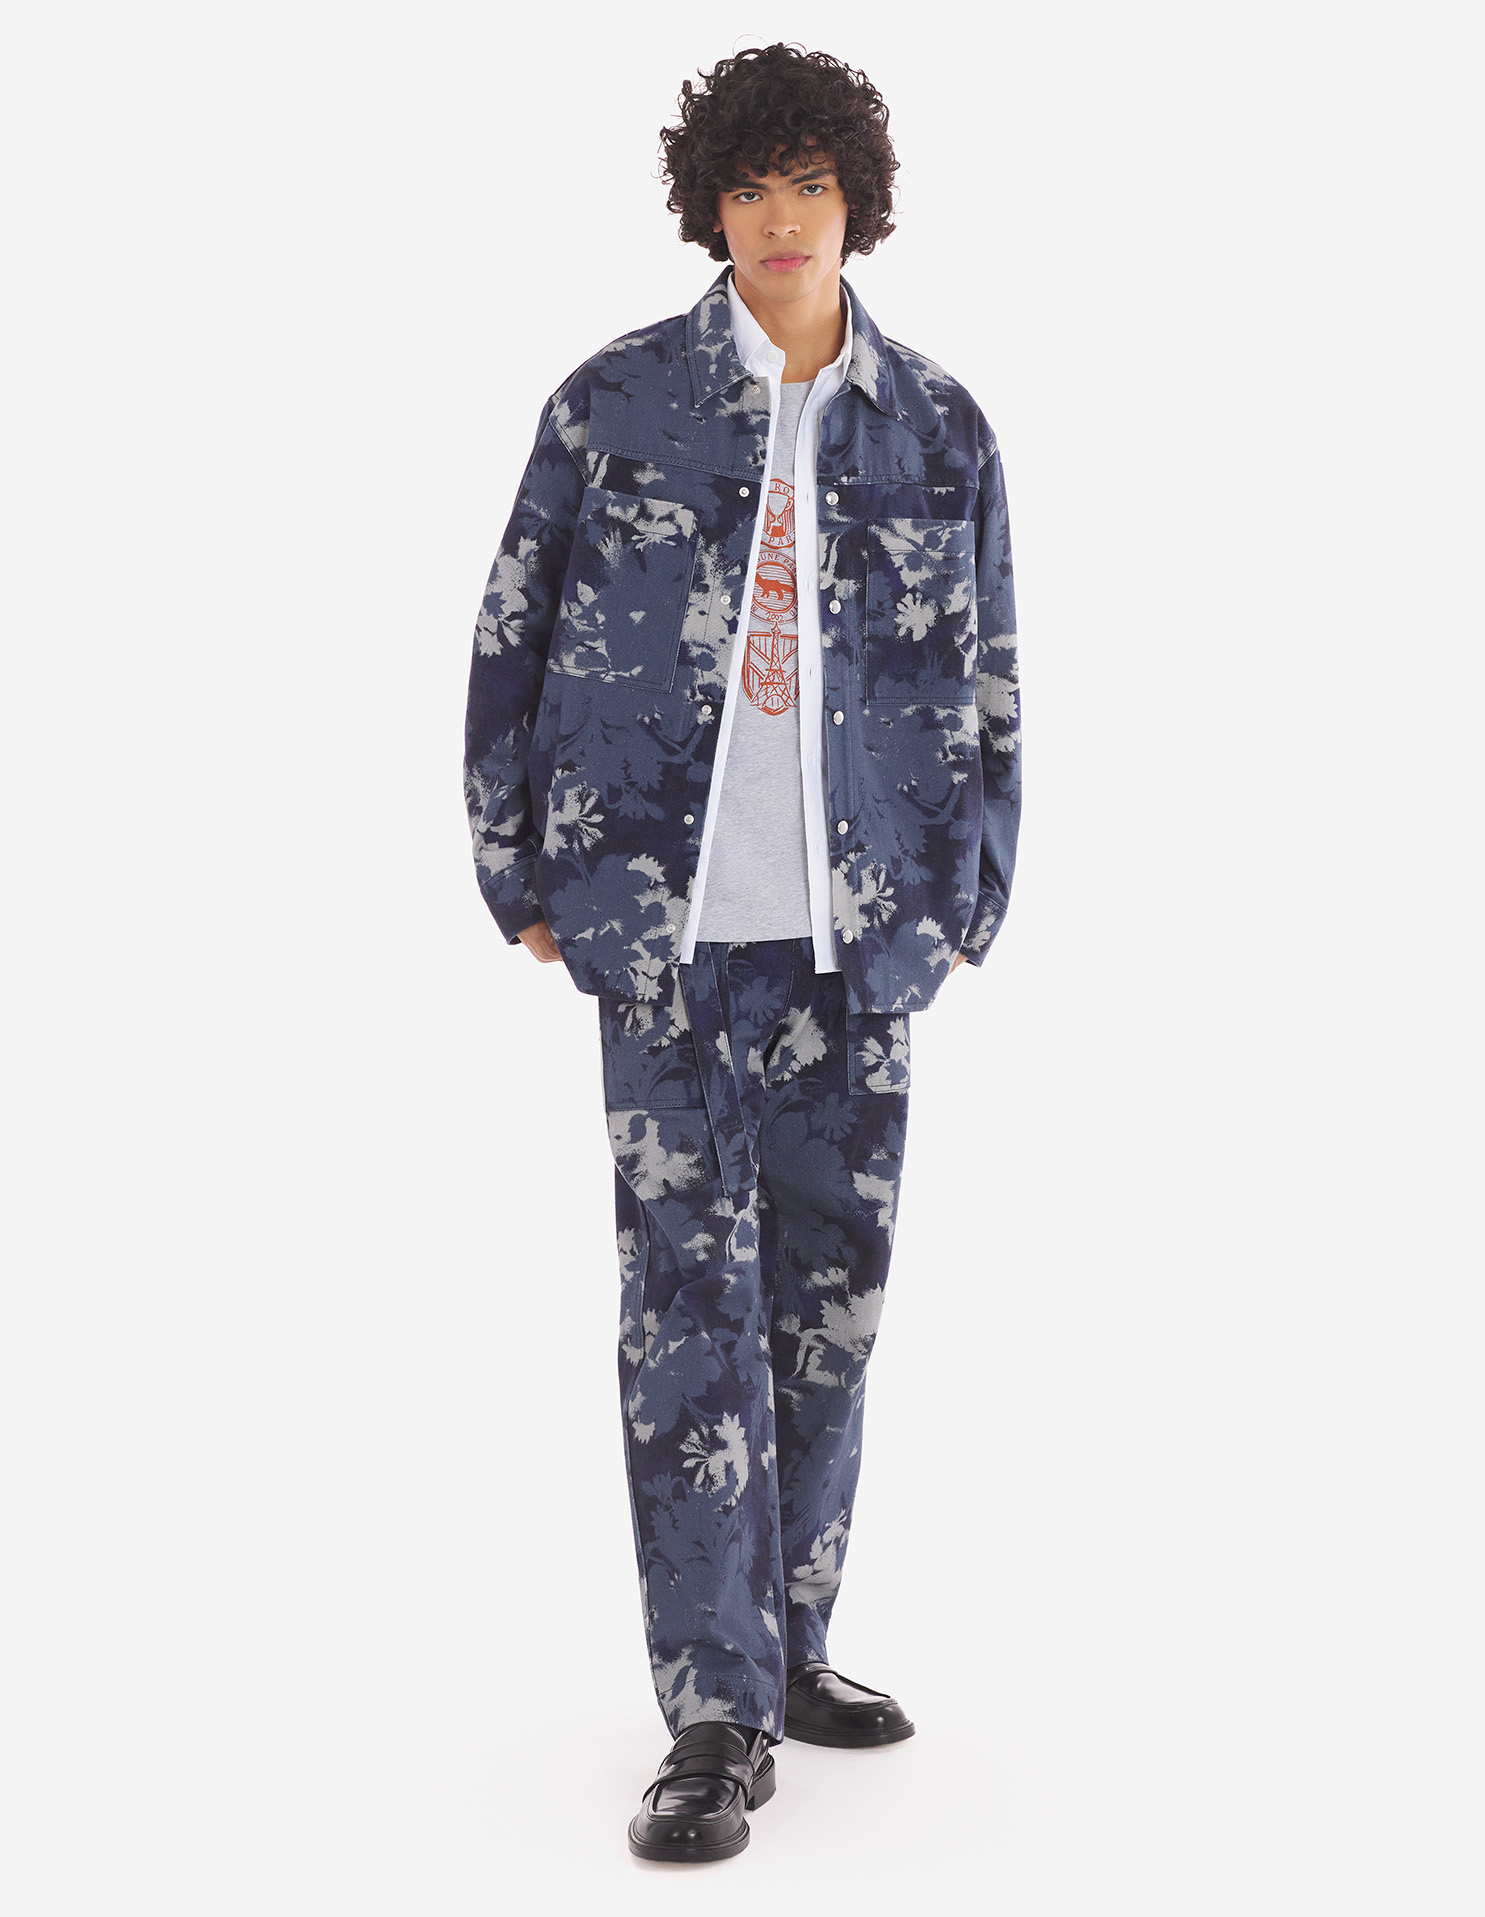 Workwear Overshirt in Bouquet Cameo Printed Cotton - Size : XL - Color : Navy/Stone Floral Cameo - for Men - Maison Kitsuné